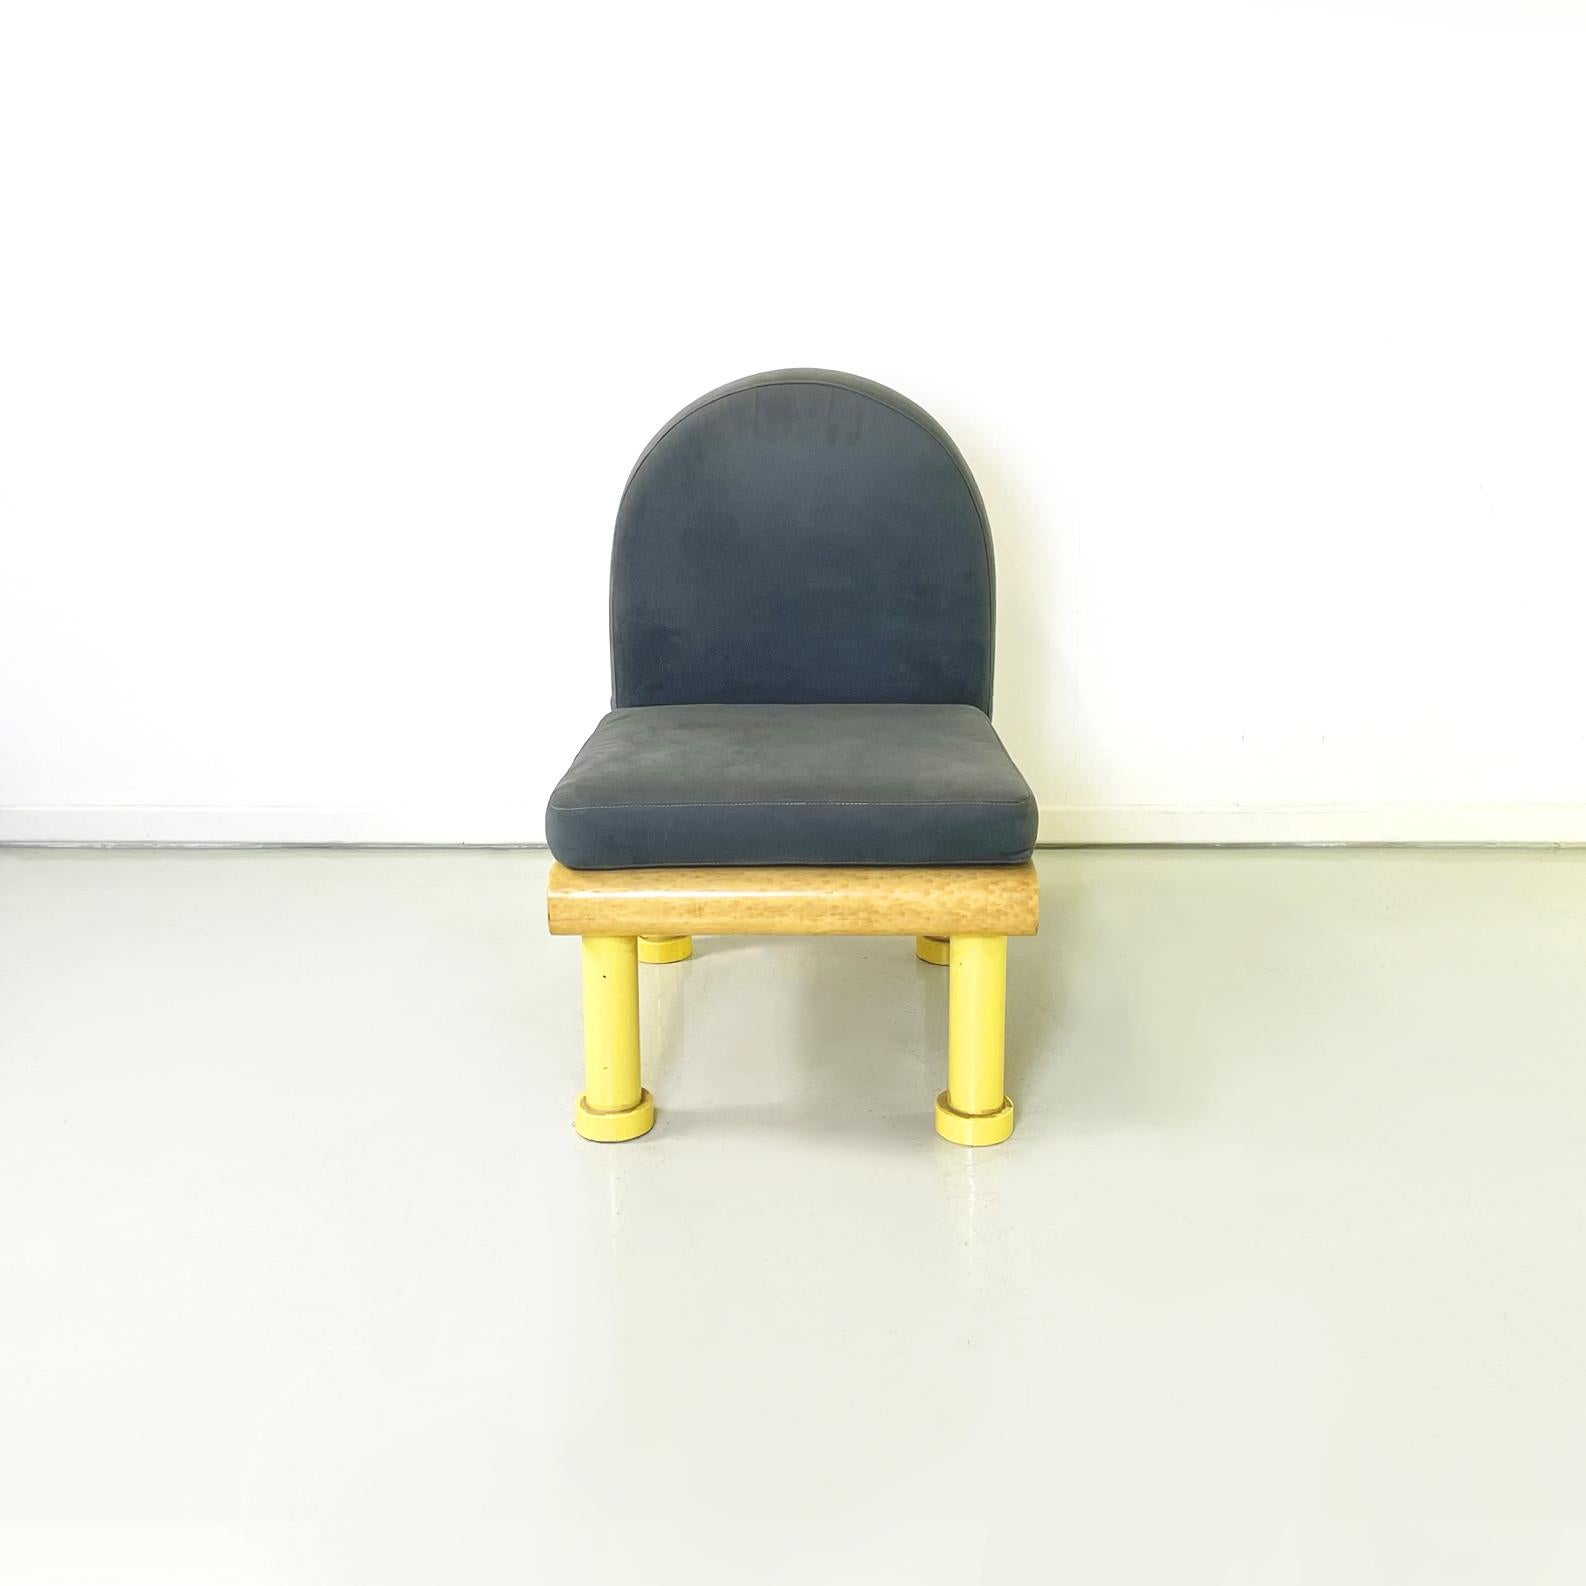 Italian modern Chair in gray velvet, briar wood and yellow metal, 1980s
Chair with squared seat and rounded back, padded and upholstered in gray velvet. The structure is composed of a part in briar wood and the 4 round section legs in yellow